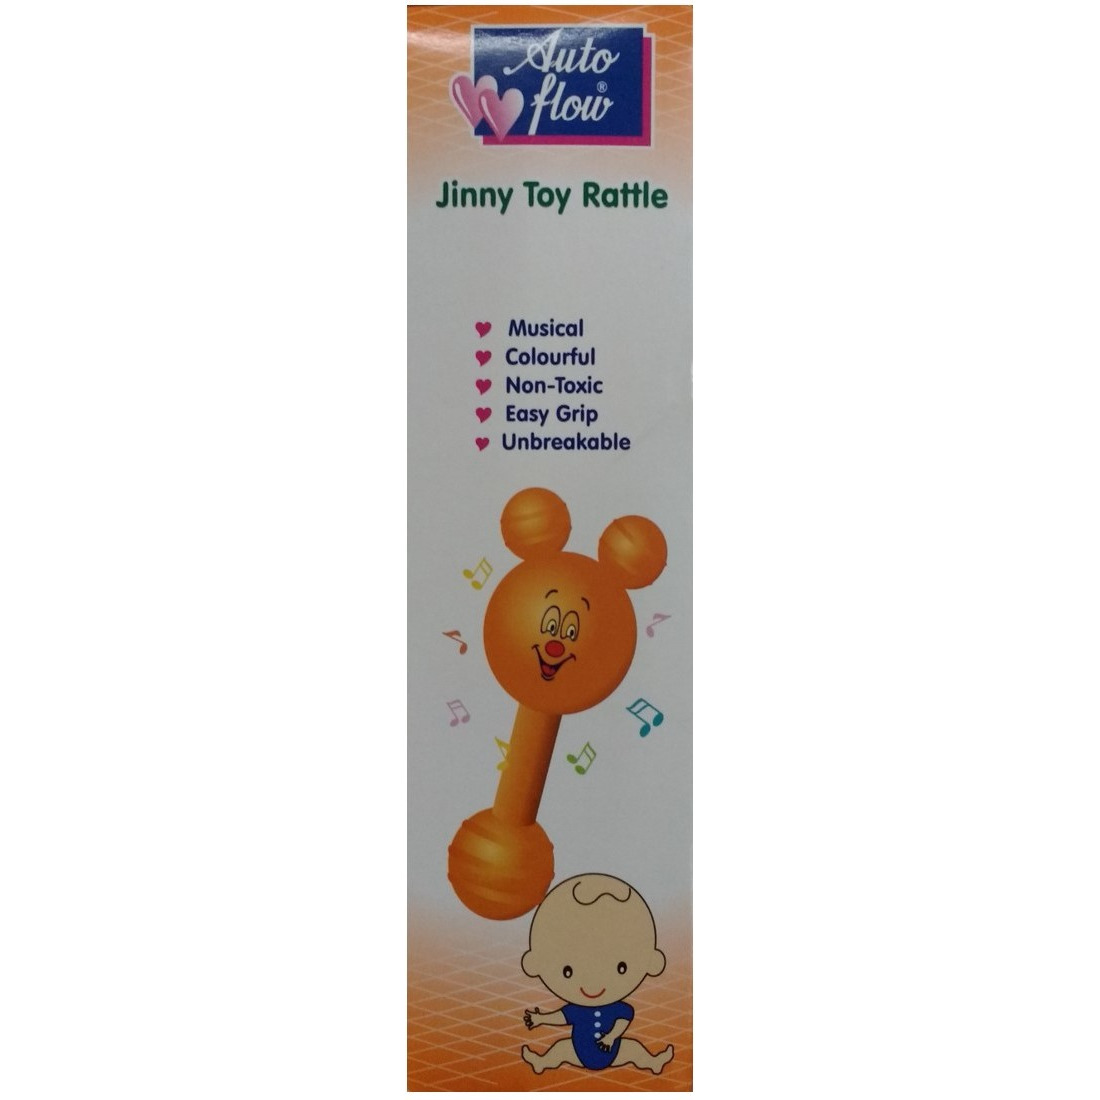 Auto Flow Rattle Toy - Jinny Toy - BT27 Combo Peach